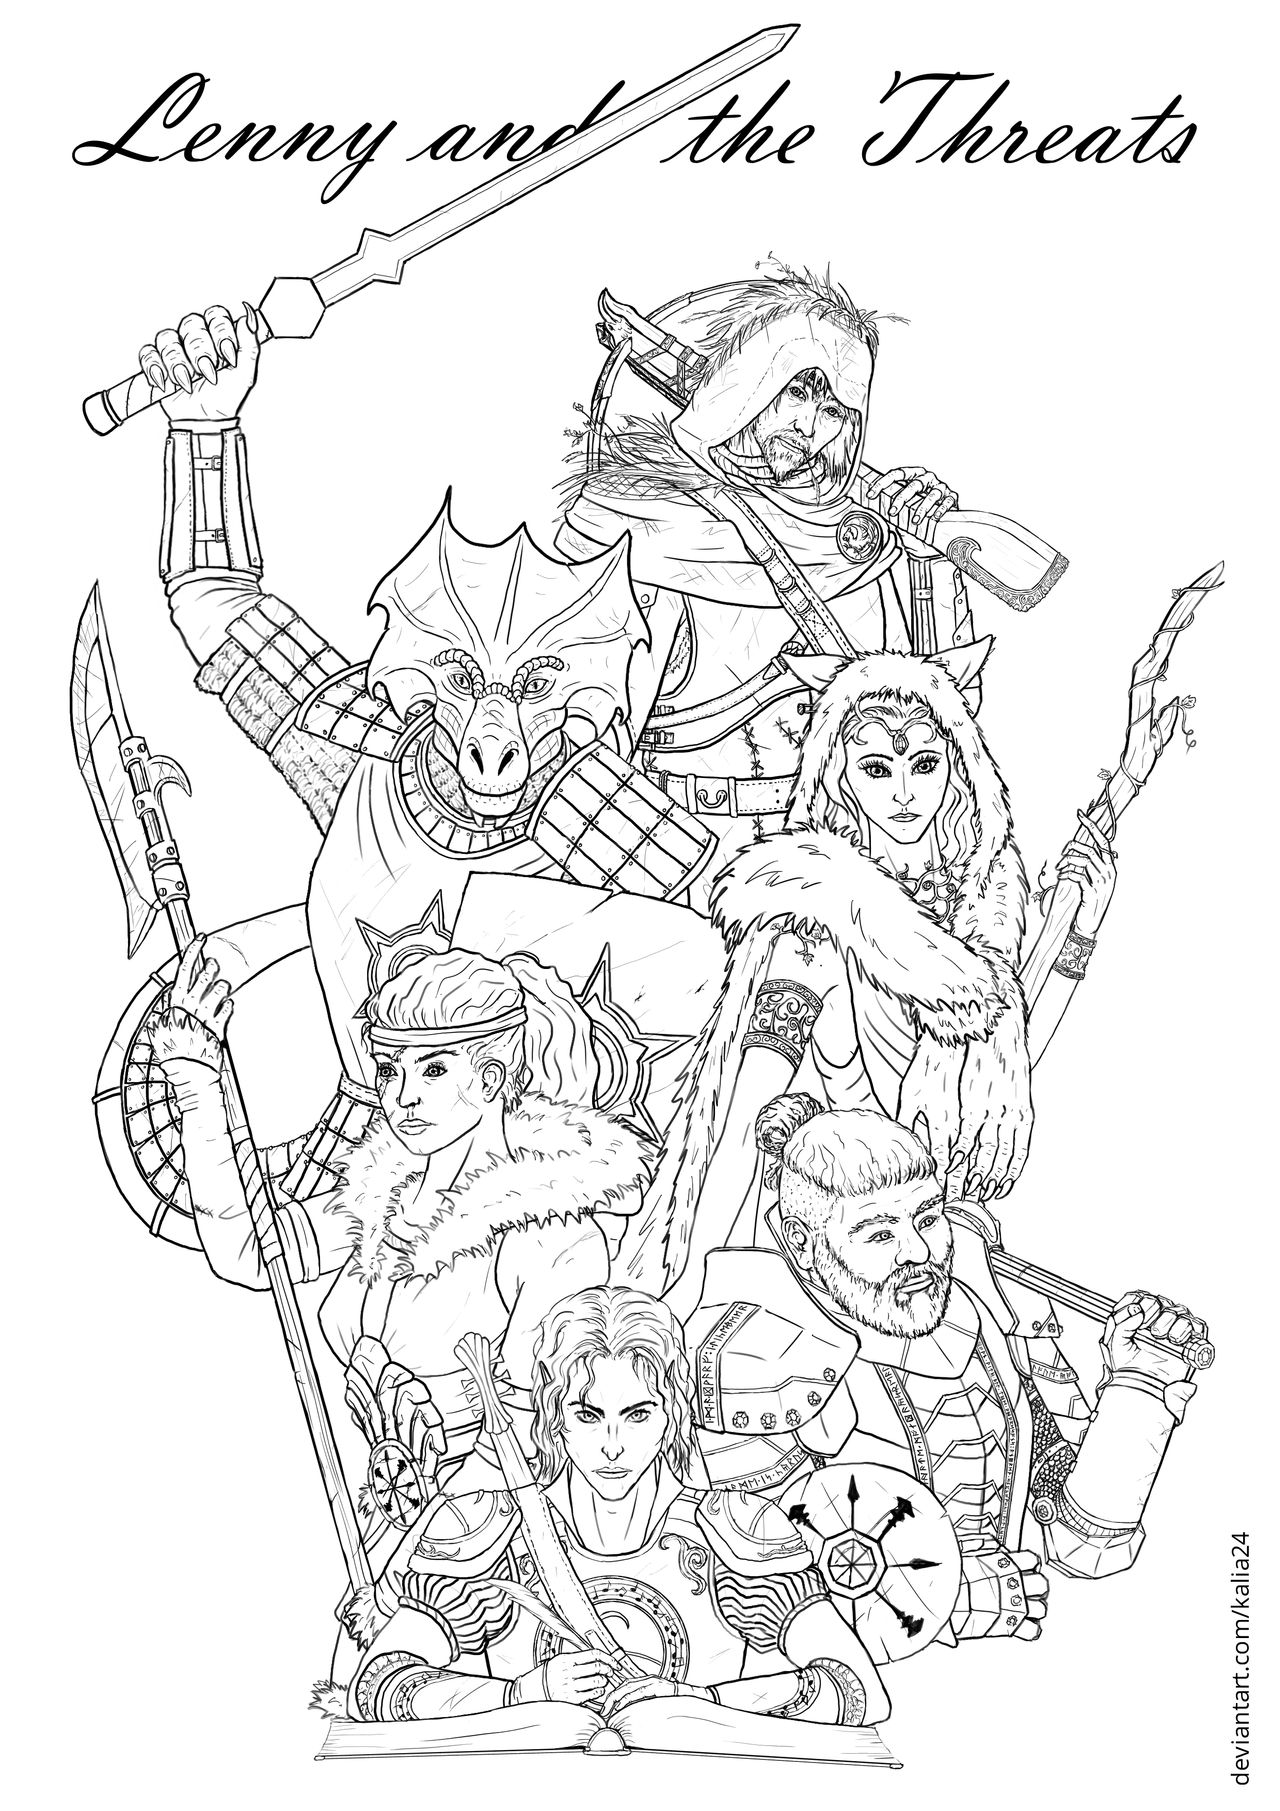 D&D roleplaying players' team